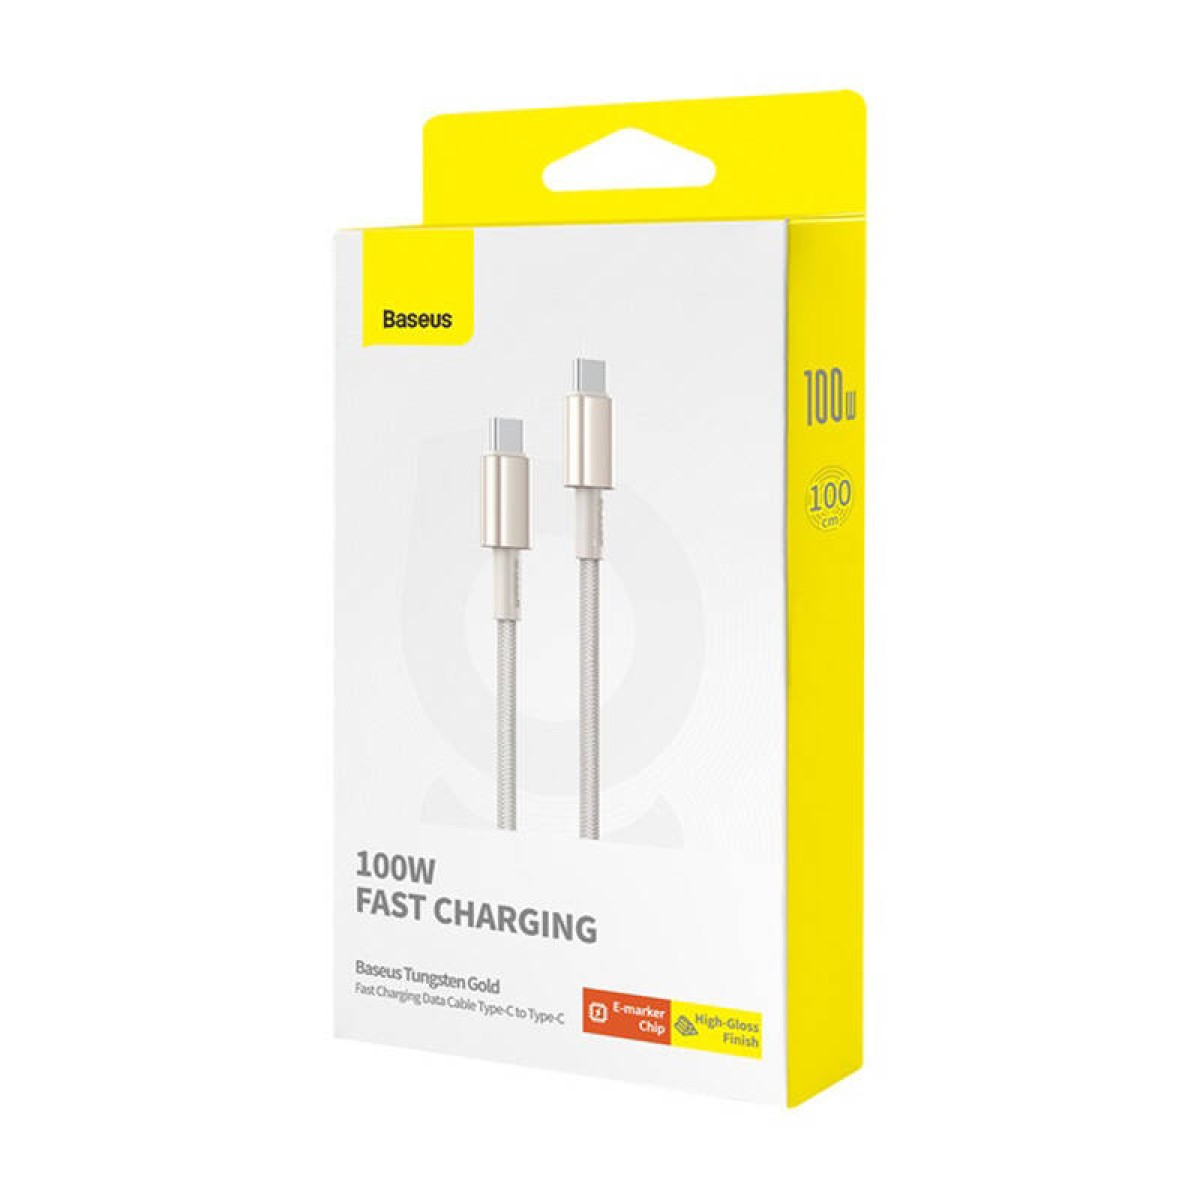 Cable USB-C to USB-C Baseus Tungsten Gold, 100W, 1m (gold)